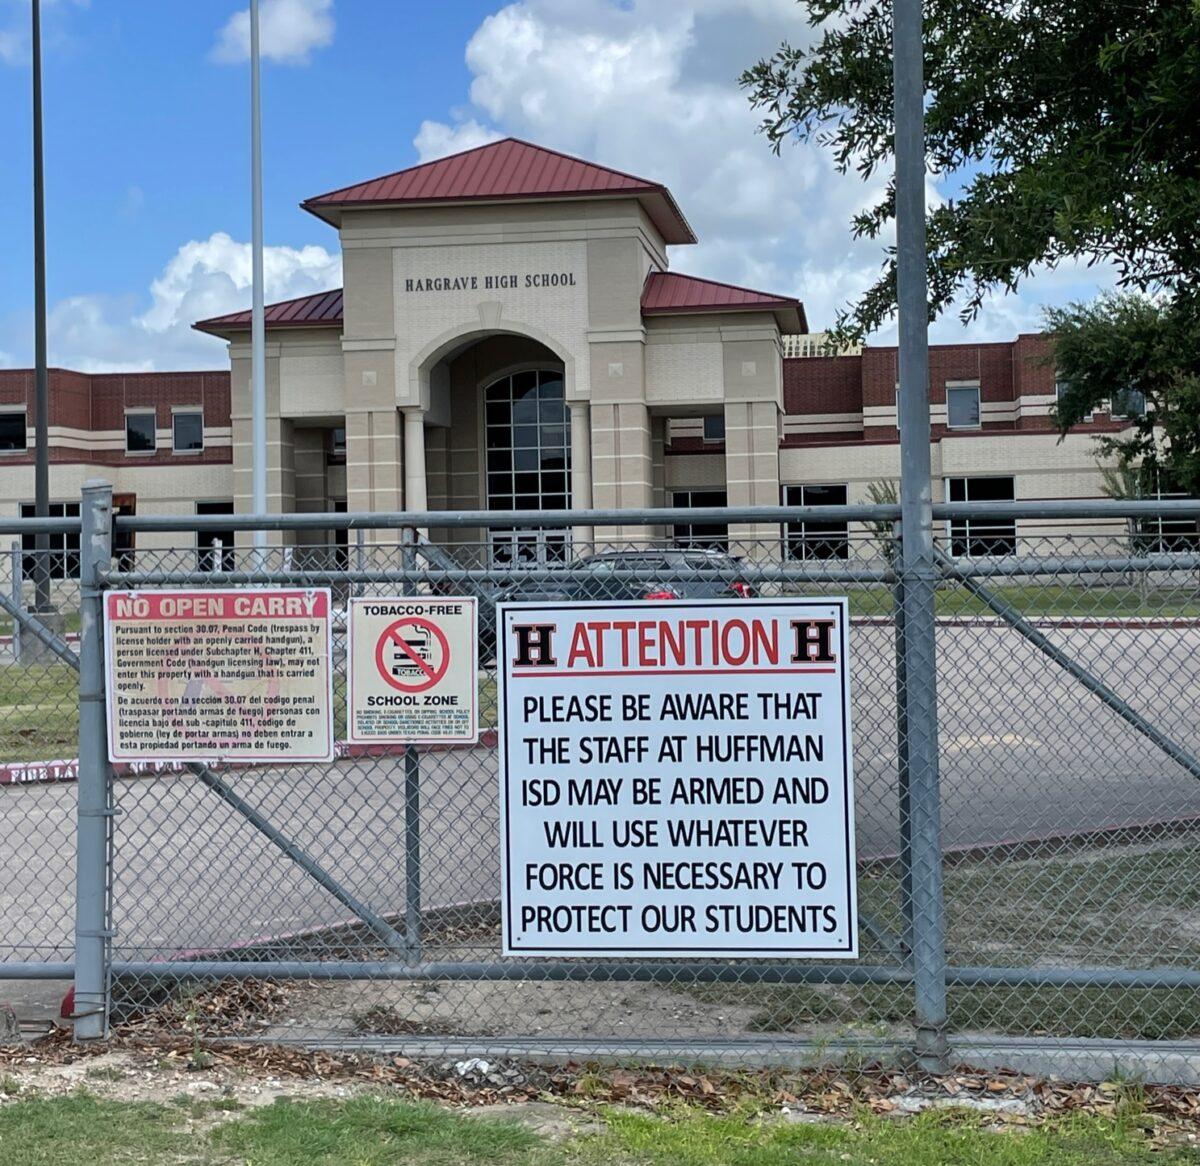 Signs at Hargrave High School in the Huffman Independent School District in Texas warn those who may enter school property with ill intent that open carrying is prohibited and that staff may be armed with concealed weapons and will use whatever force is necessary to protect the students in their charge. (Courtesy of the Huffman Independent School District)